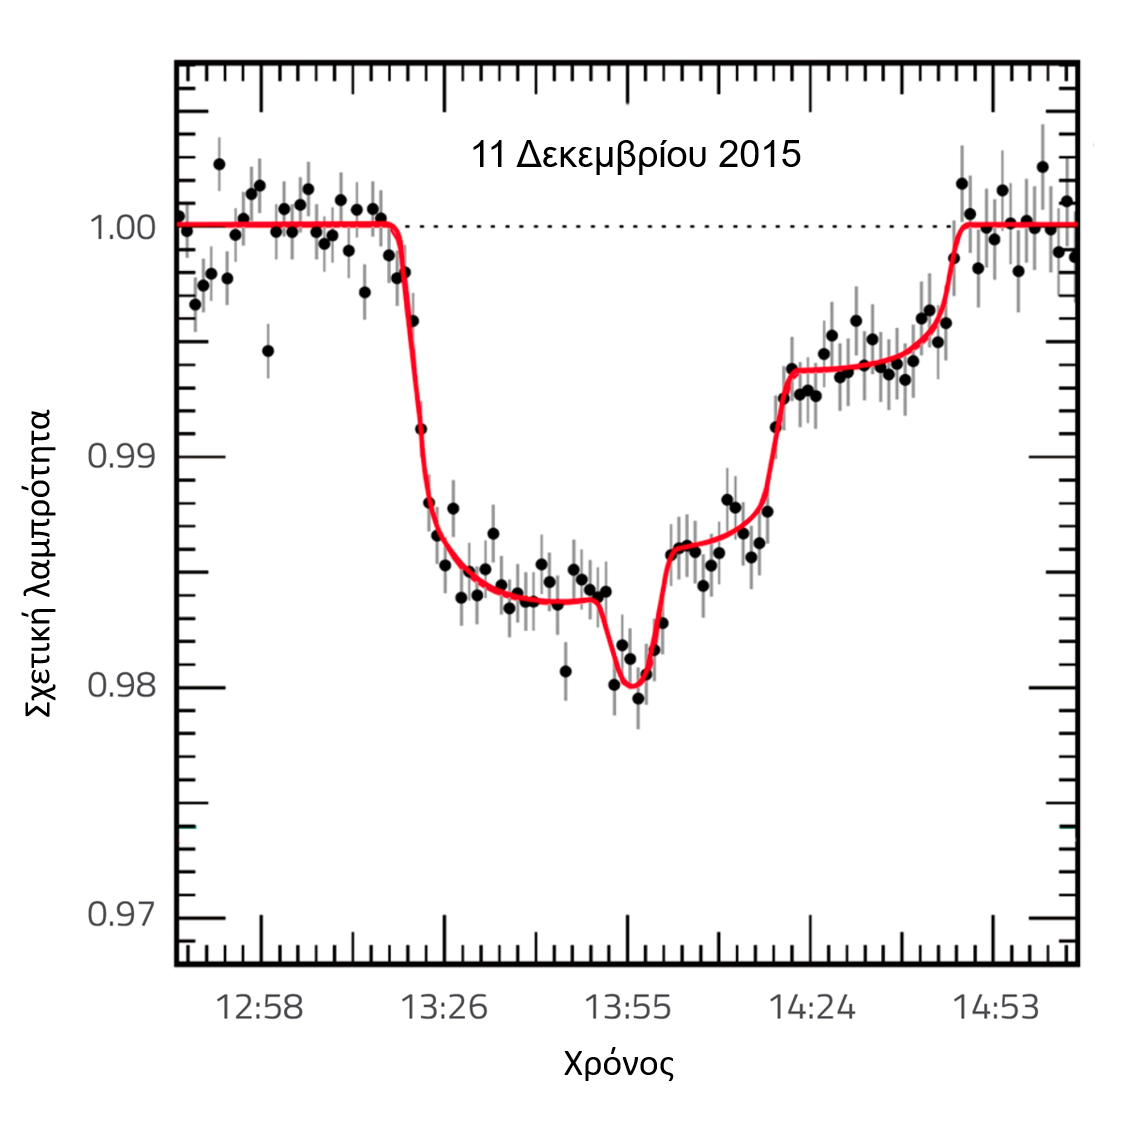 Figure 1: Graph showing the changing brightness of the red dwarf star TRAPPIST-1, which is caused by three exoplanets passing in front of the star in quick succession